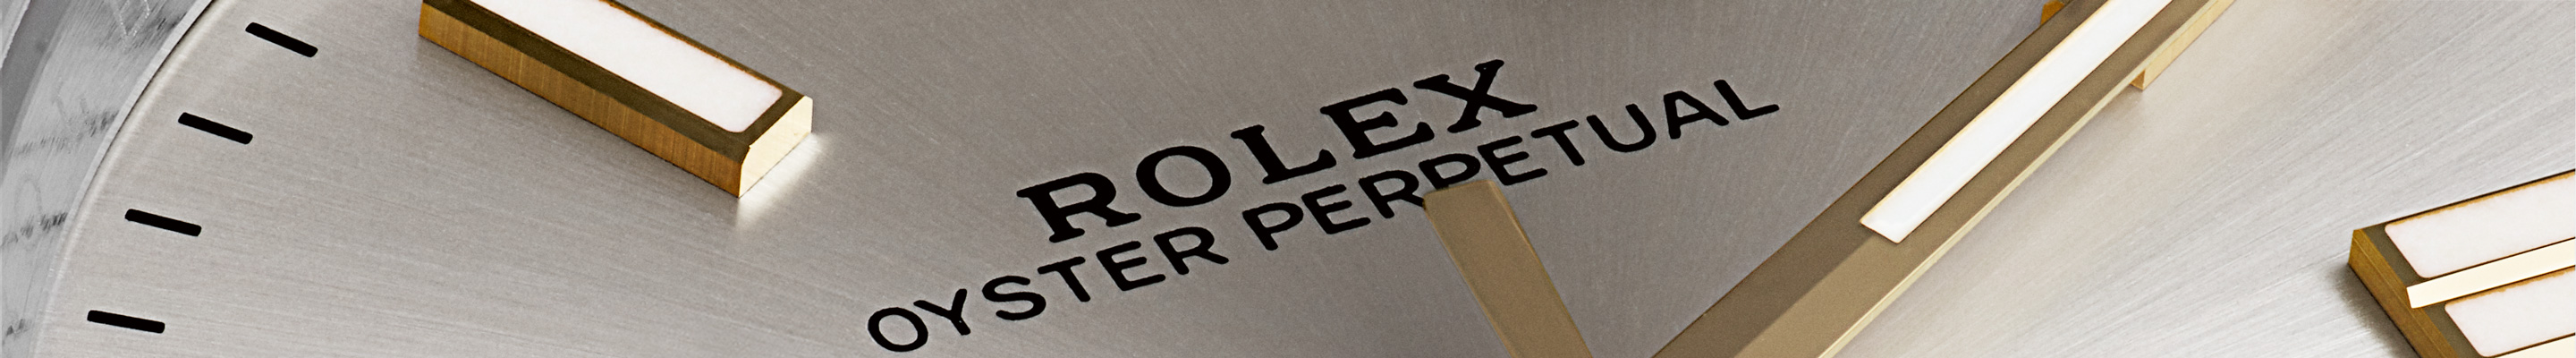 Rolex Oyster Perpetual, essence of the Oyster